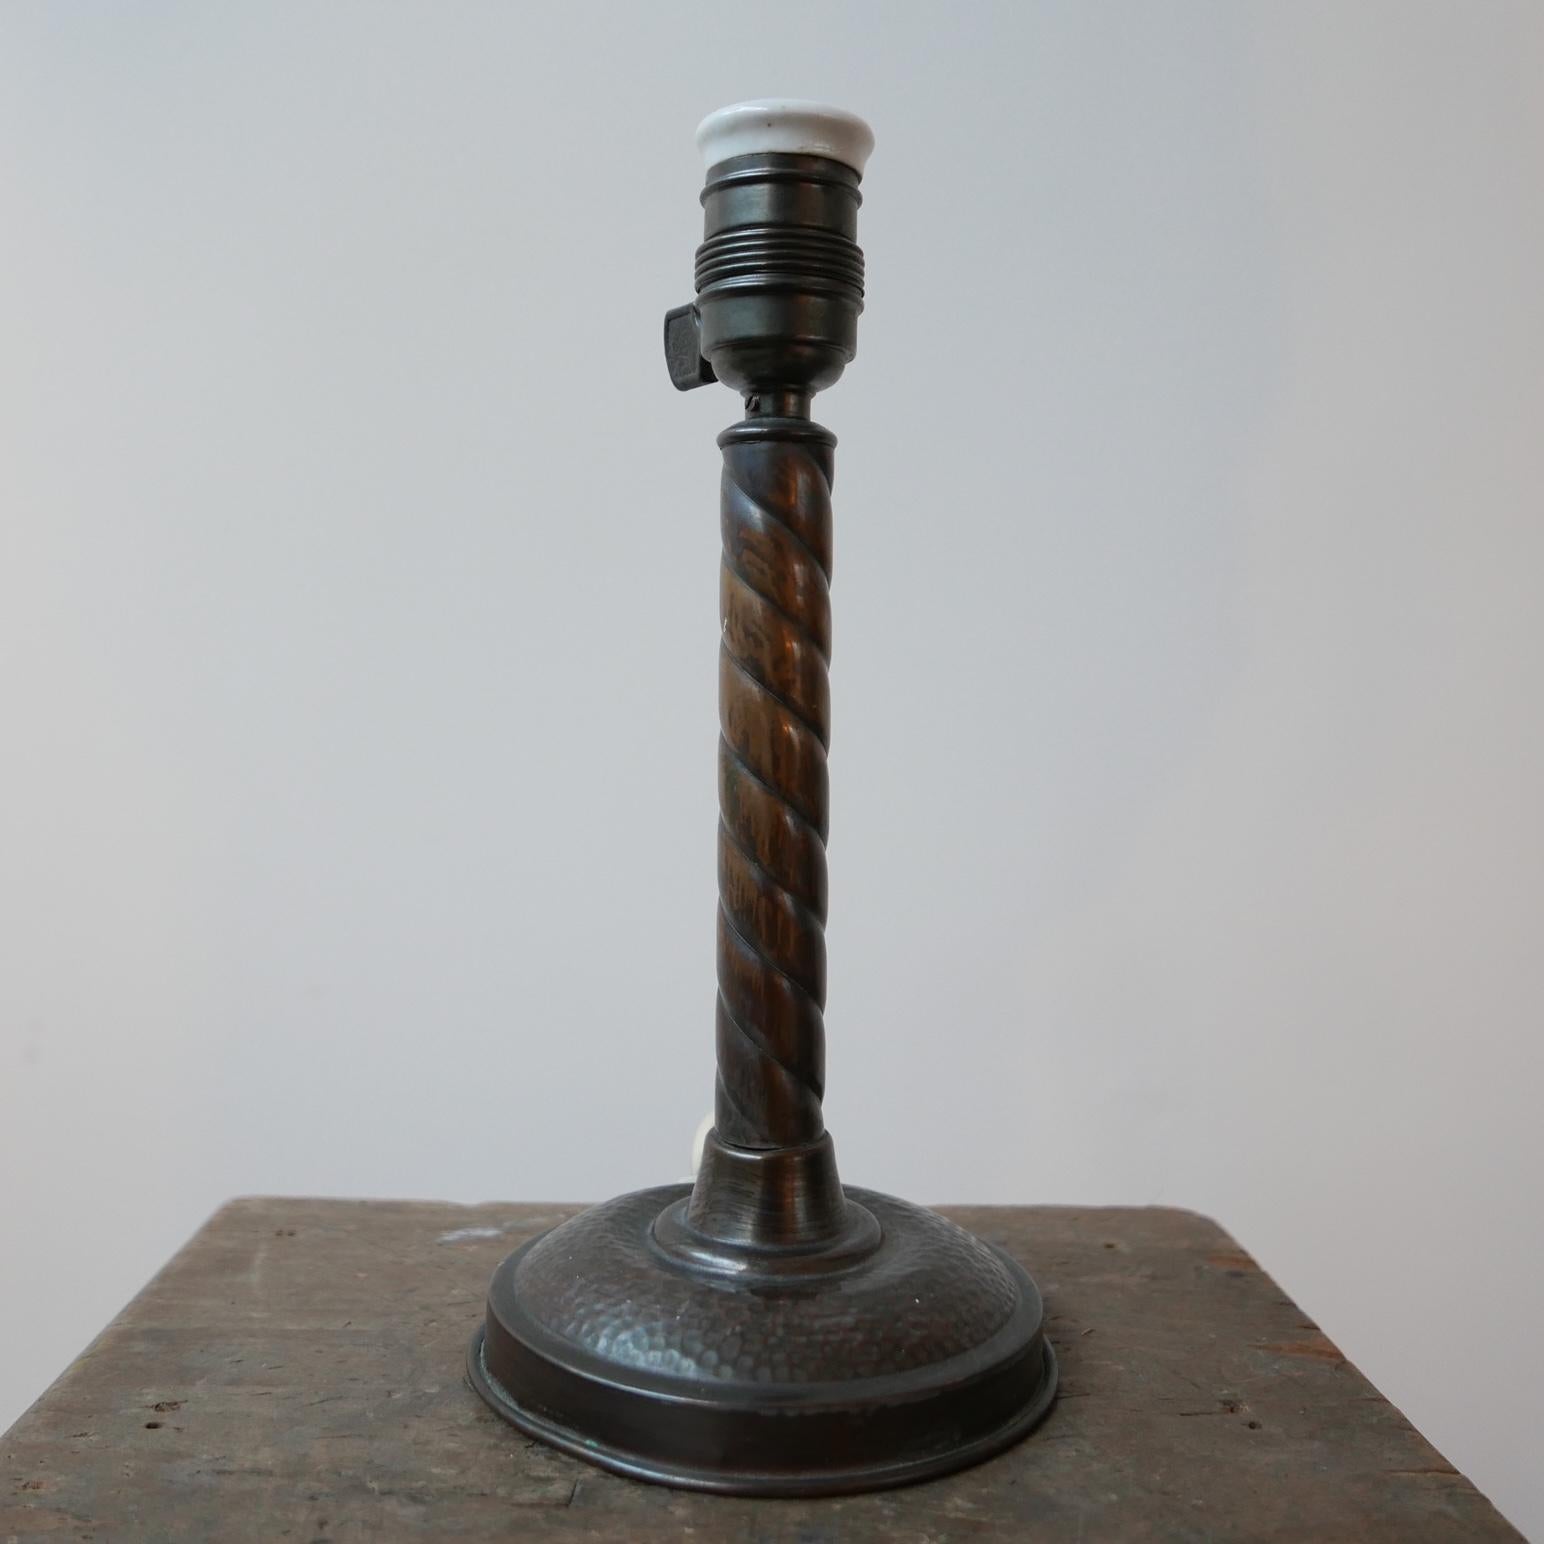 An antique small table lamp. 

Sweden, c1930s. 

Patinated and hand beaten metal likely brass or copper. 

Since re-wired and PAT tested. 

Some scuffs and wear commensurate with age, some small dings, but generally good condition.